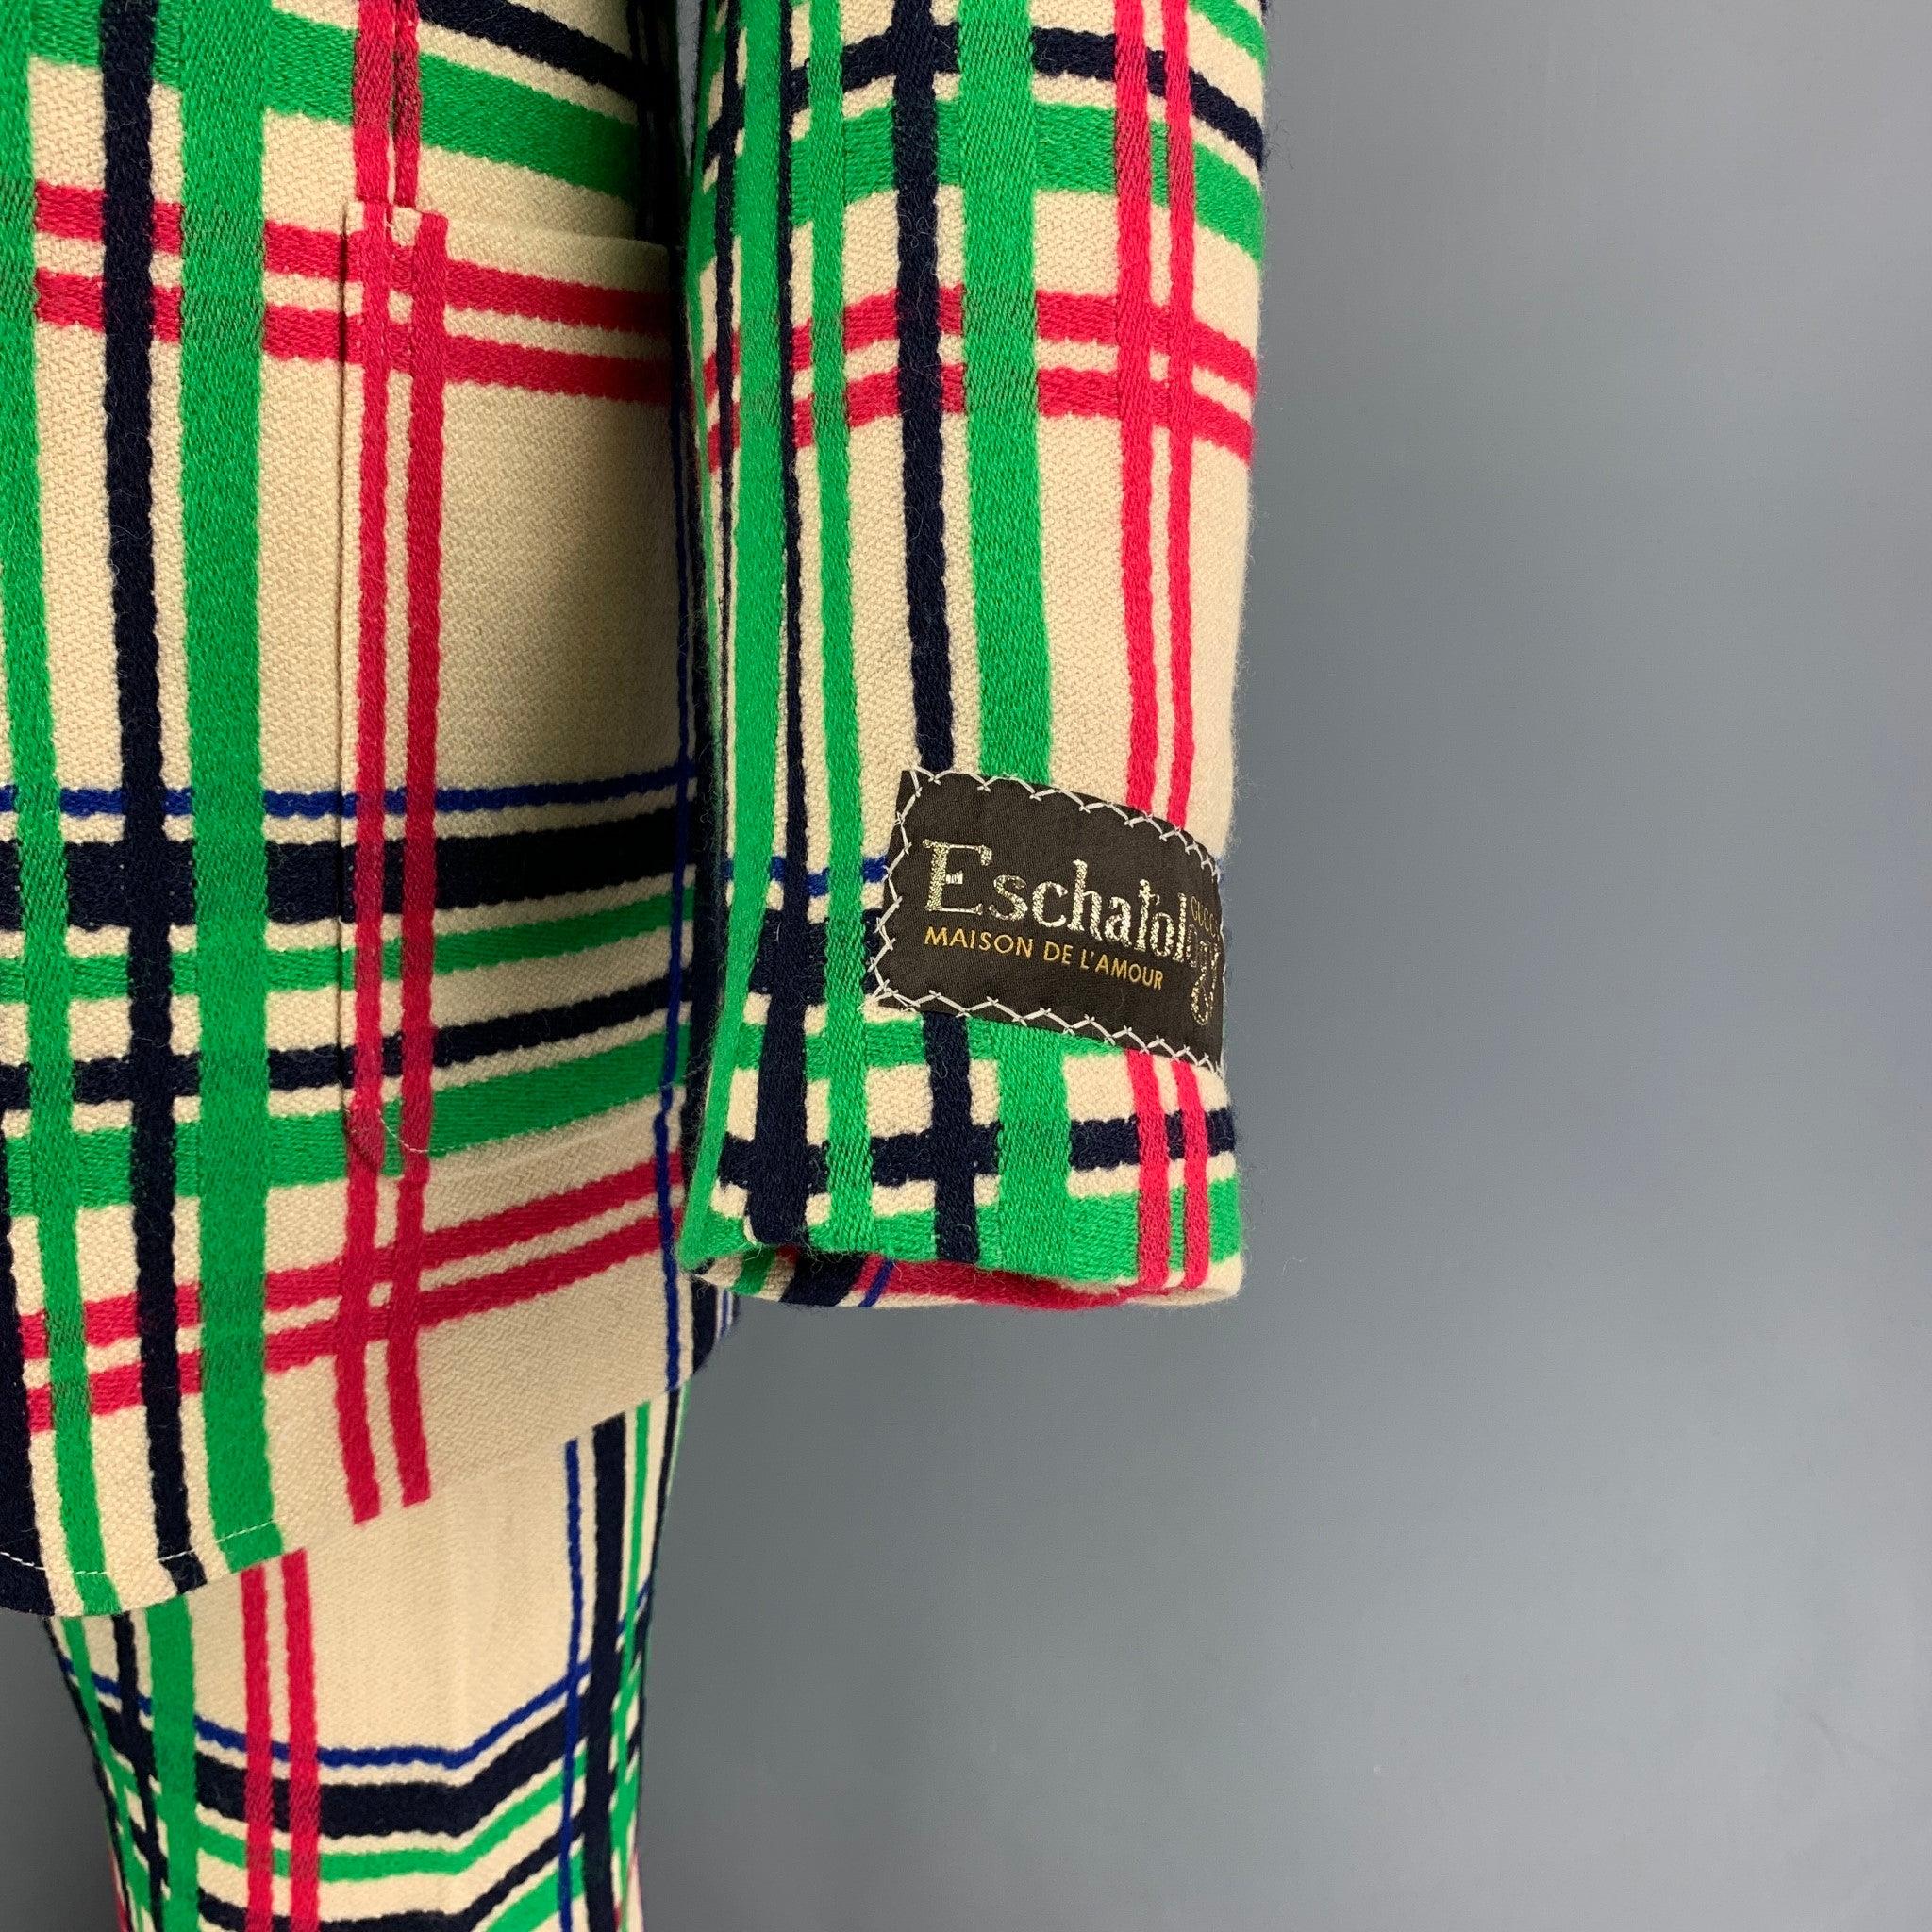 GUCCI Spring Summer 2021 suit comes in multi-color plaid wool / cotton with a full liner and includes a single breasted, double button sport coat with lapel and matching flat front trousers. Made in Italy. New With Tags.  

Marked:   46